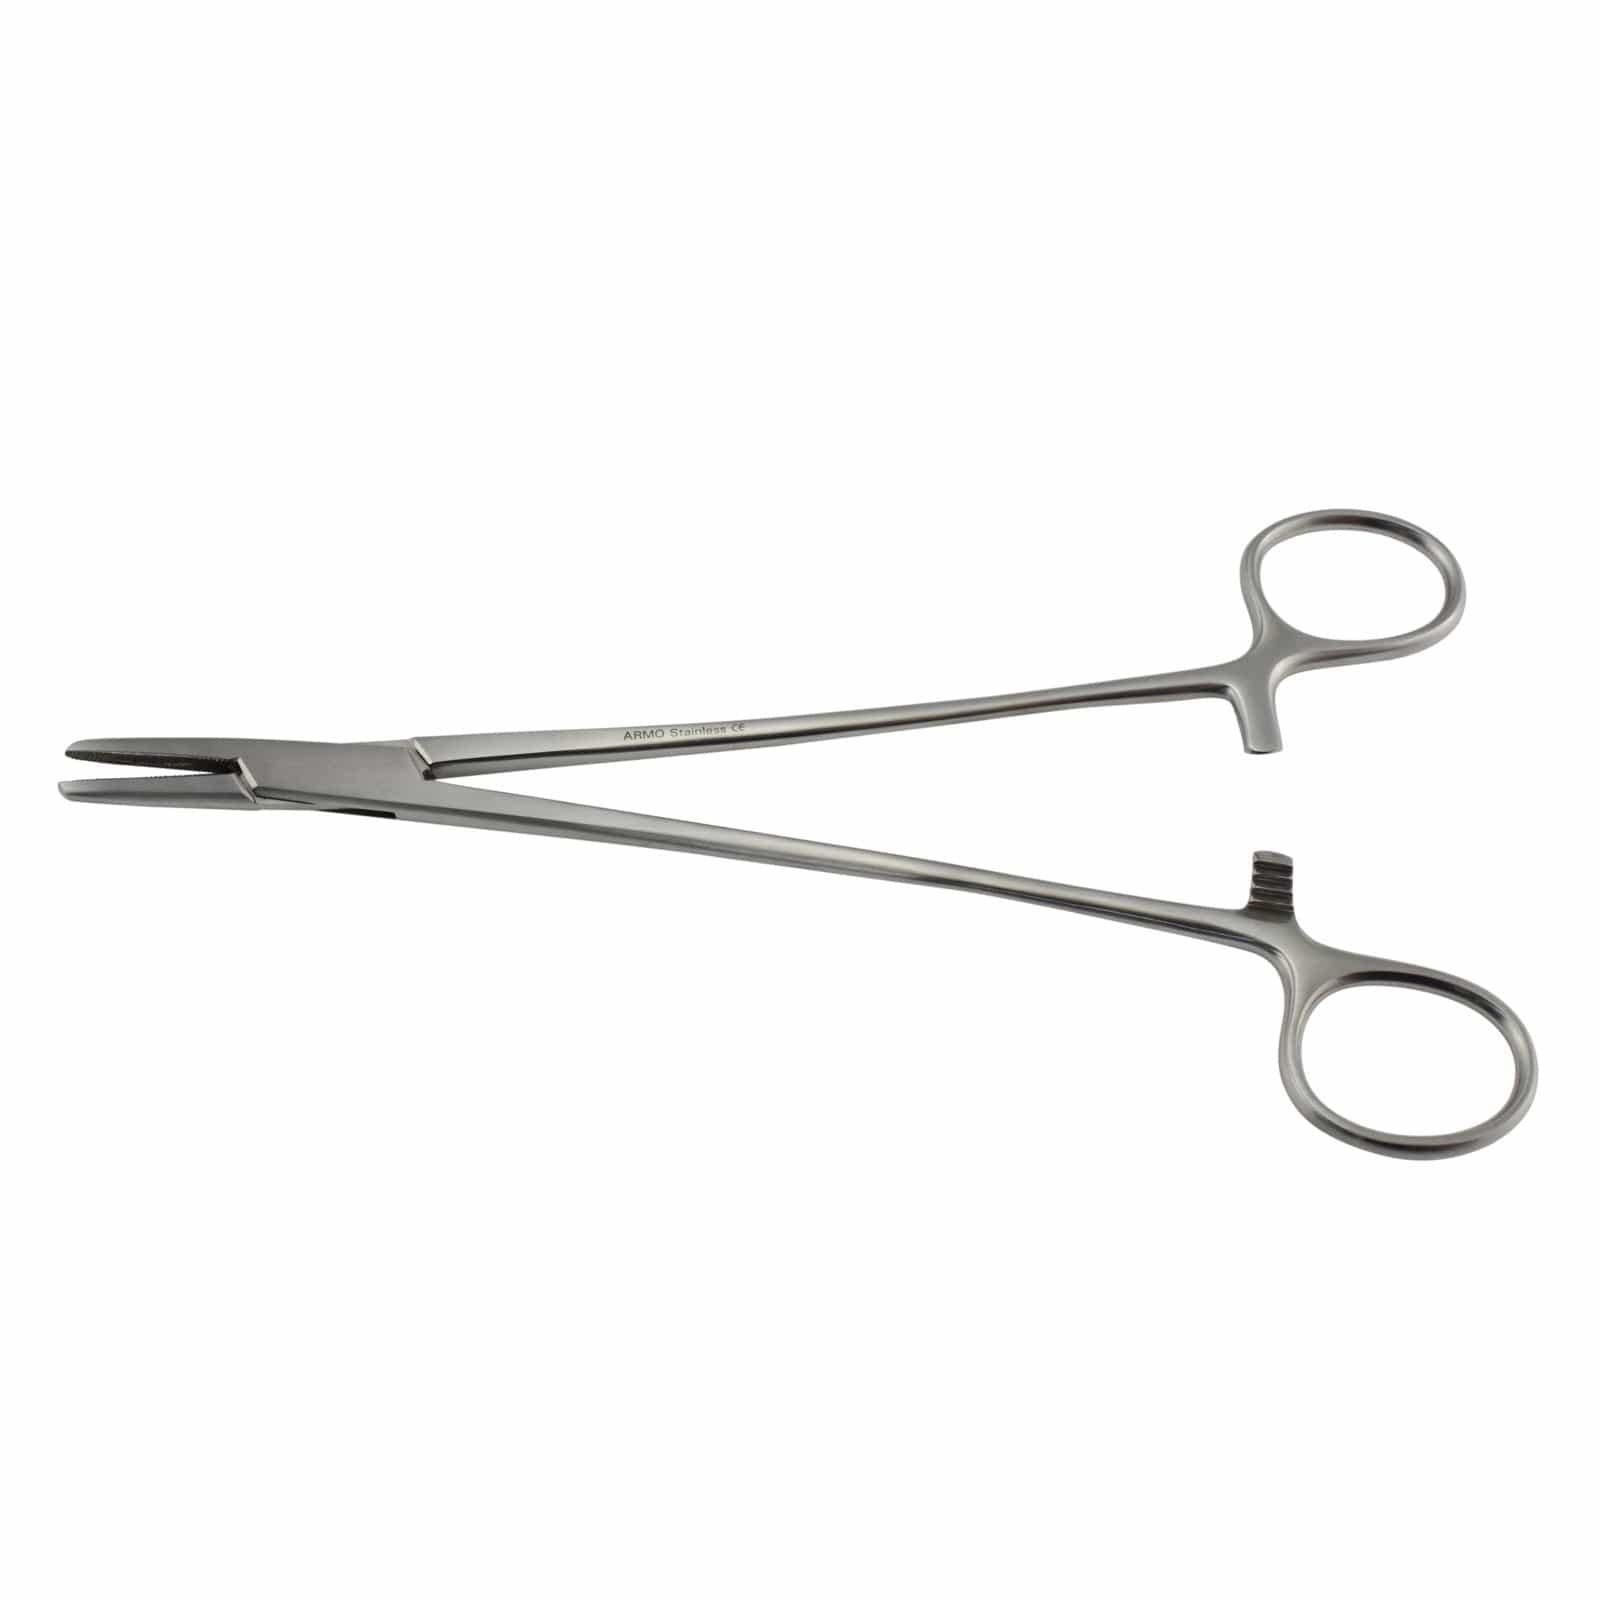 Armo Surgical Instruments 24cm / Right Handed / Standard Armo Mayo Hegar Needle Holder